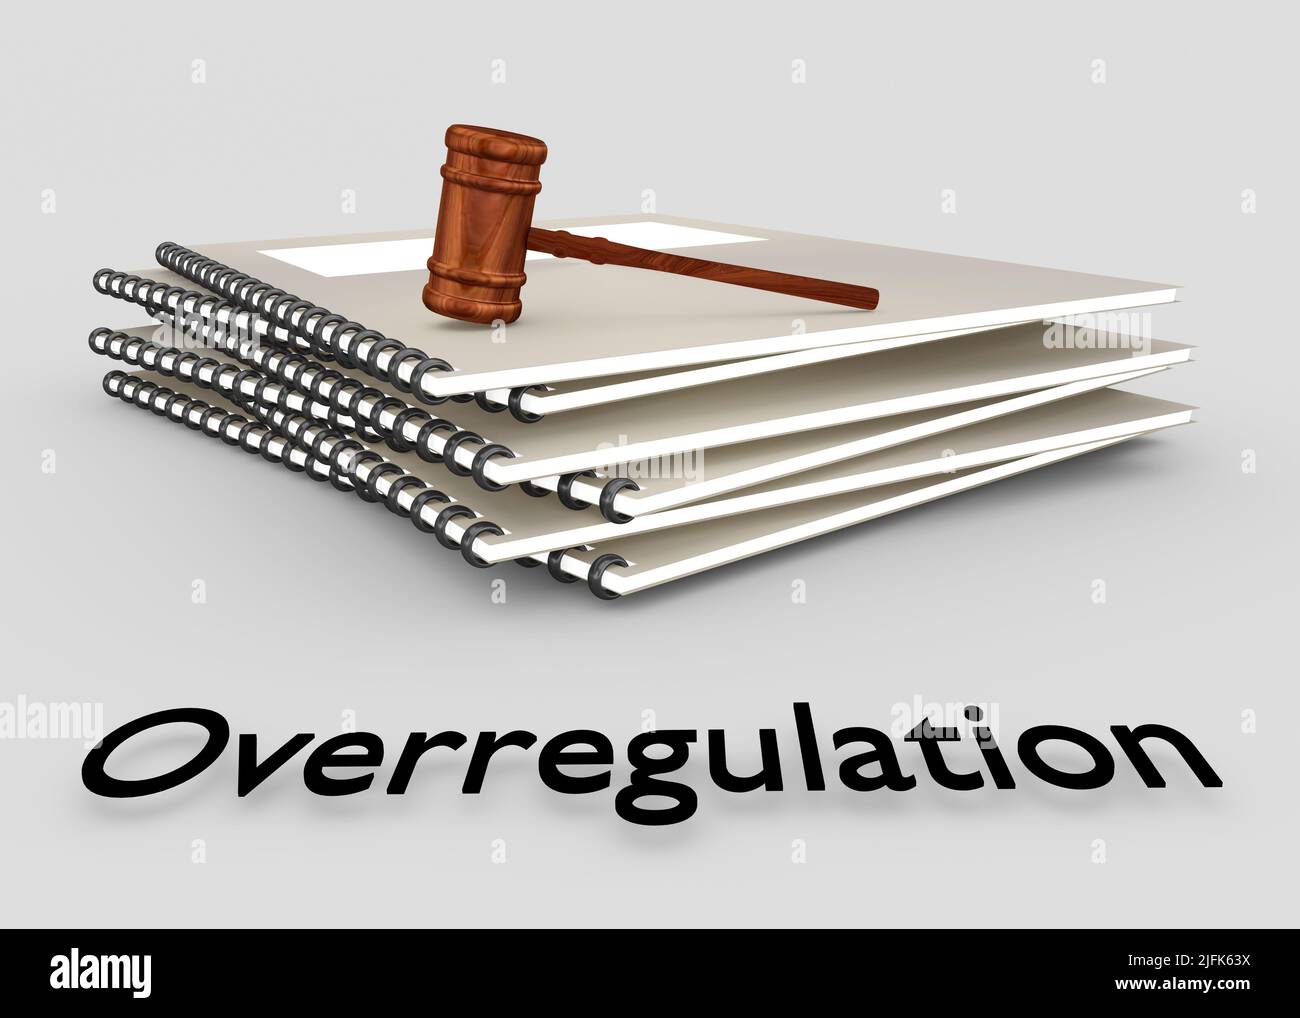 3D illustration of a judge gavel on top of a pile of booklets titled as Overregulation, isolated on gray. Stock Photo